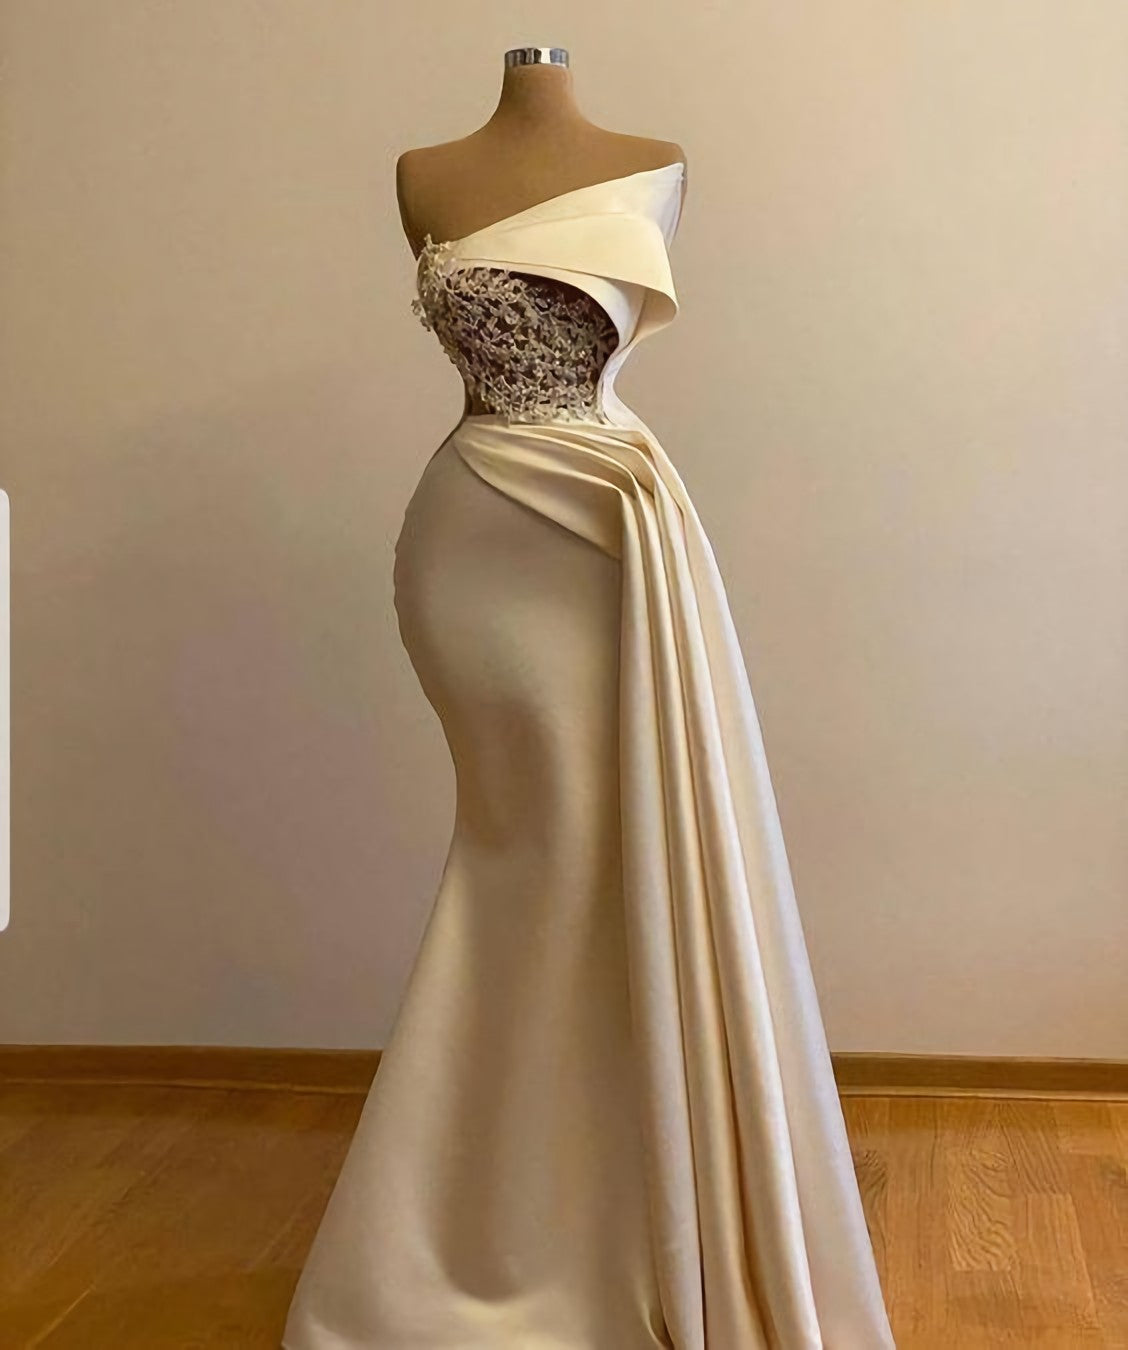 Off Shoulder Ivory Prom Dress, With Cape Wedding Gown Bridal Dress, Long Ivory Engagement Dress, African Clothing For Women Prom Dress